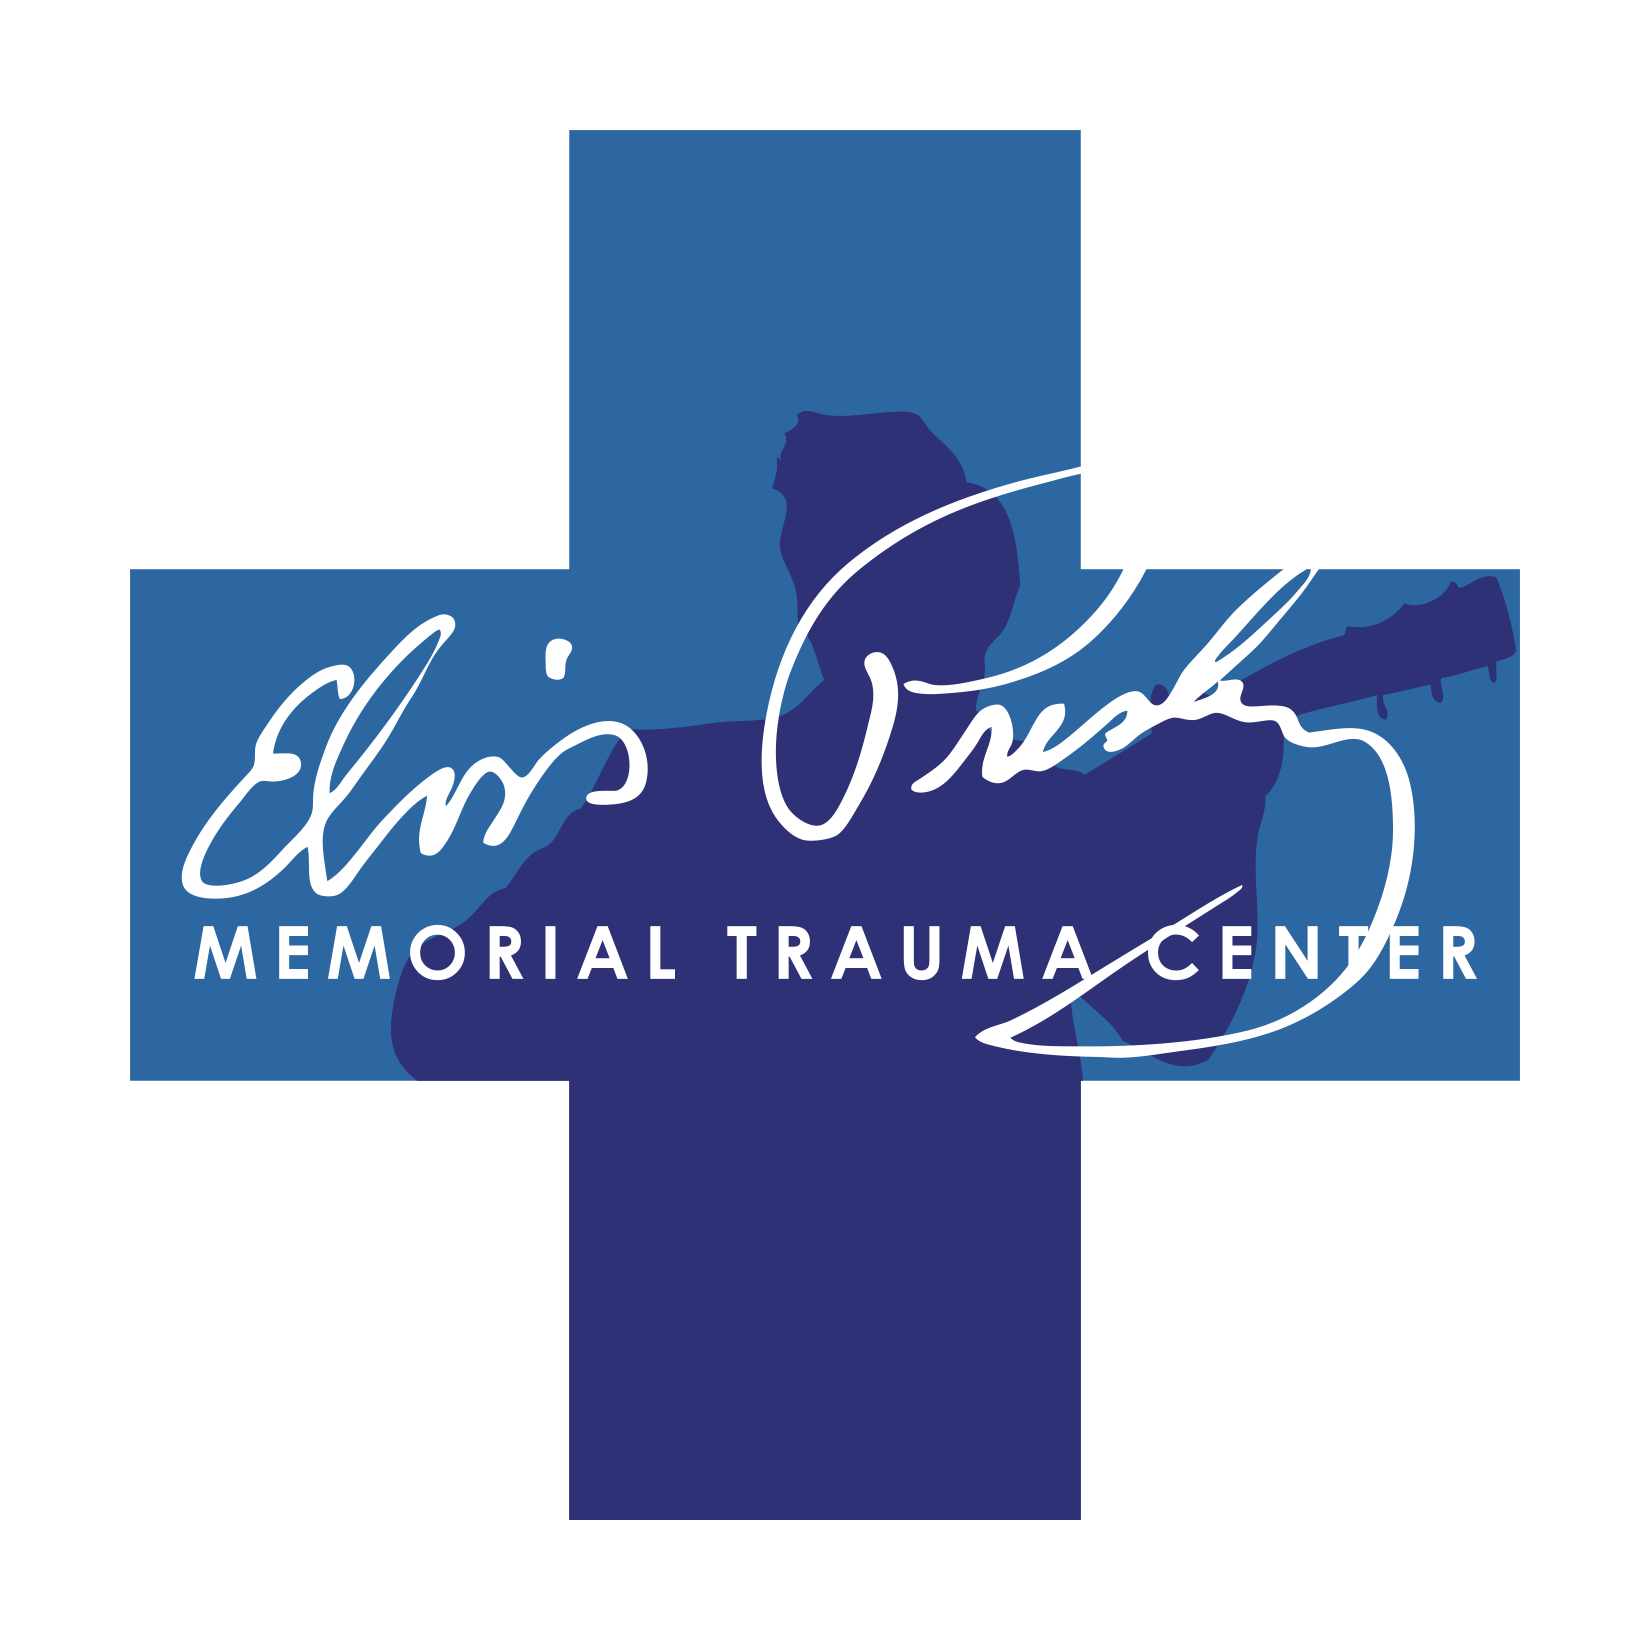  Elvis Presley Trauma Center brand and wearables logo  © EPE, Reg. U.S. Pat. &amp; TM Off.  Branding creative and design by Chuck Mitchell 